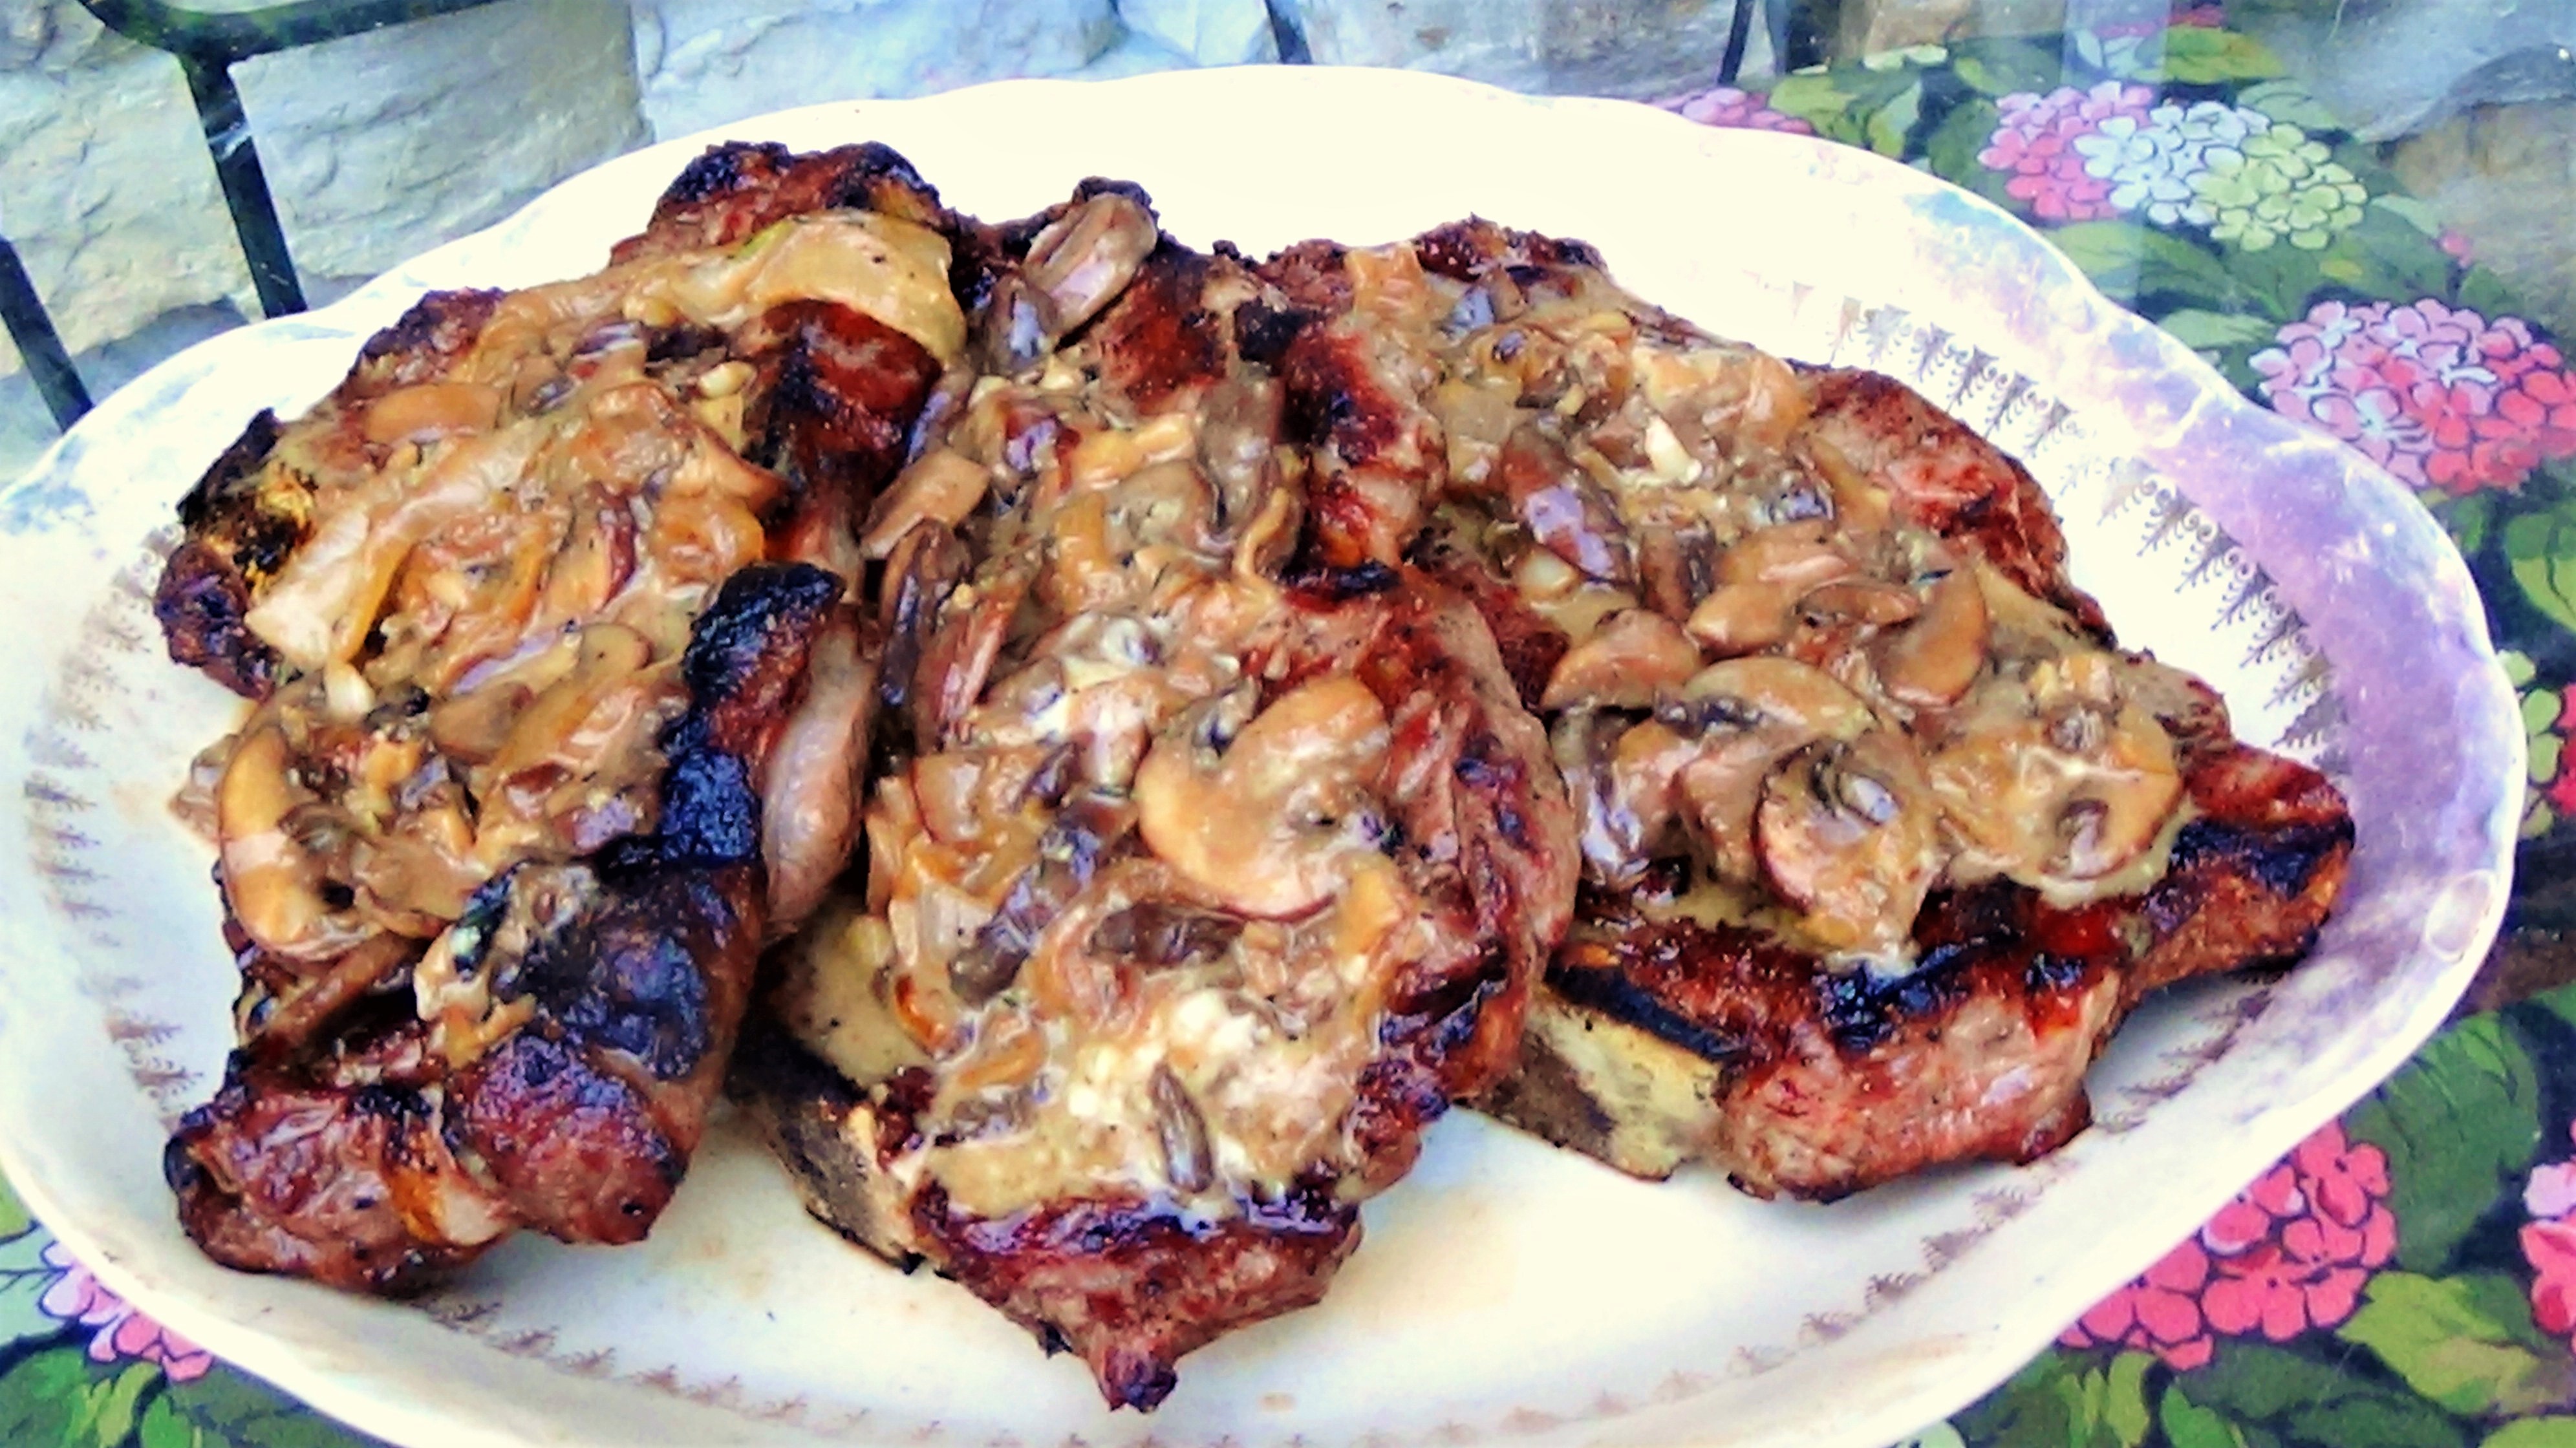 Grilled T-Bone Steaks with Onion, Mushroom and Blue Cheese Sauce